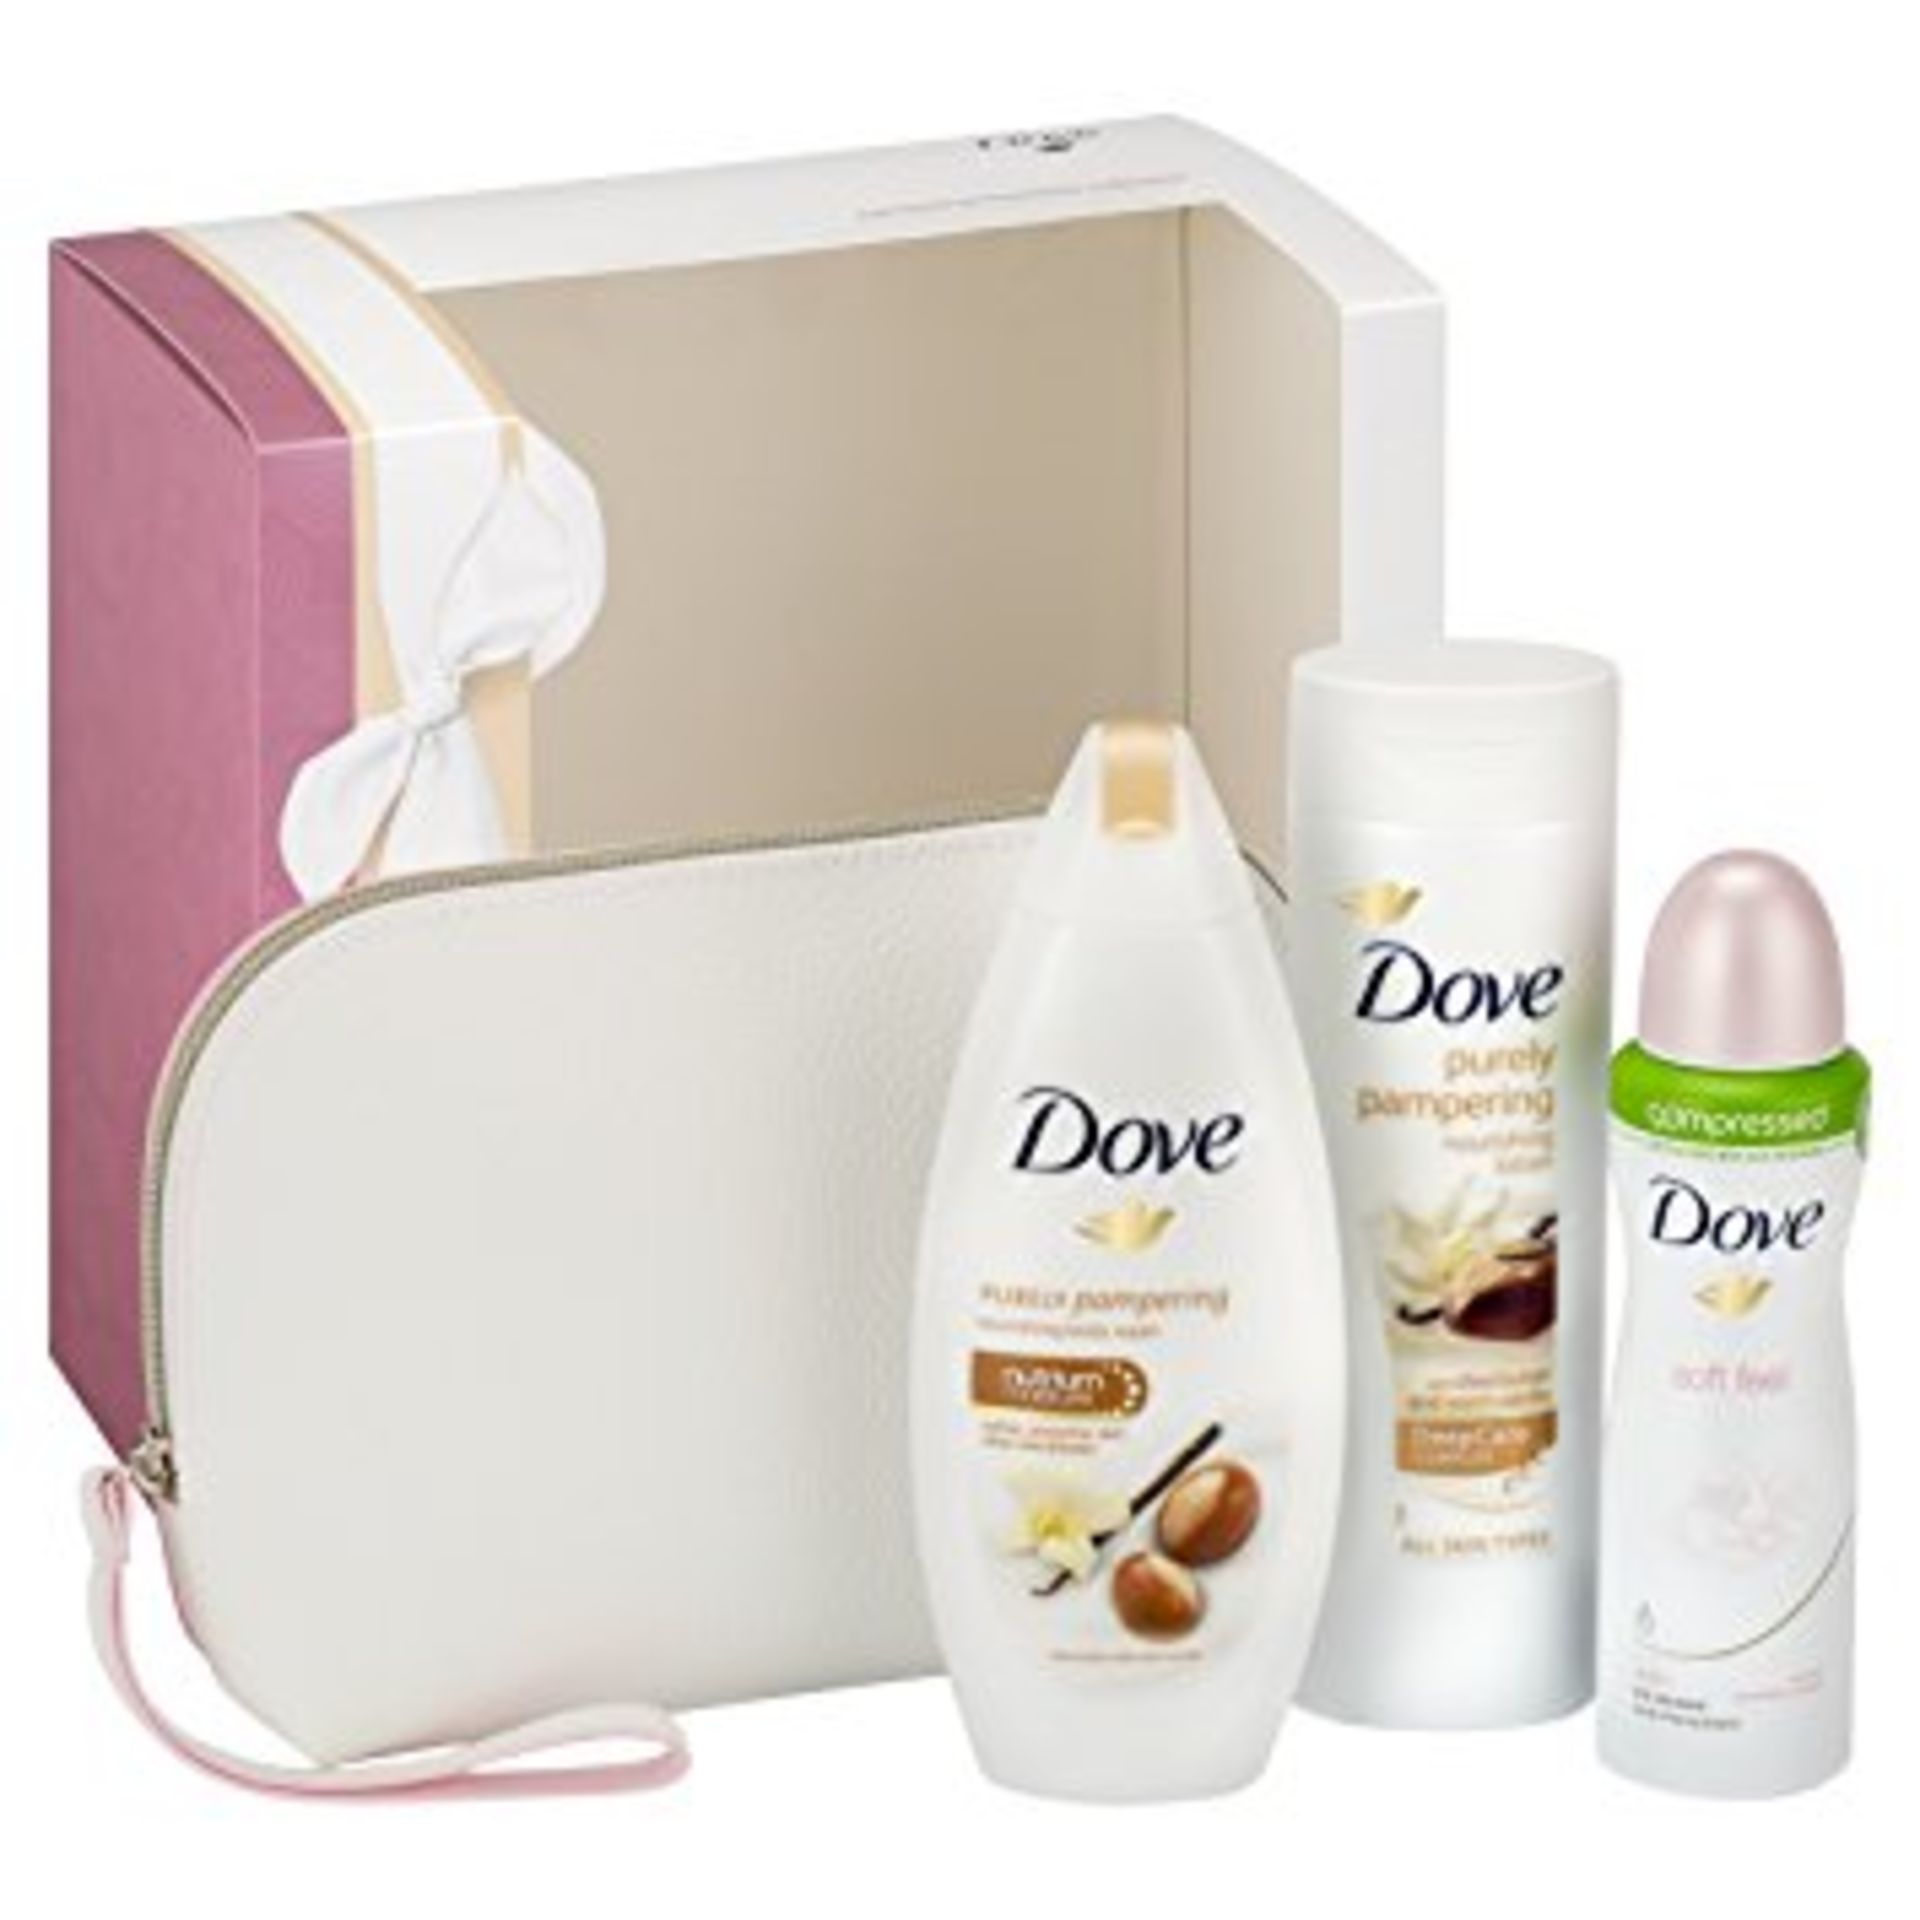 + VAT Brand New Dove Pampering Moments Trio & Washbag Set Includes 3 Full-Size Dove Products - Image 2 of 3